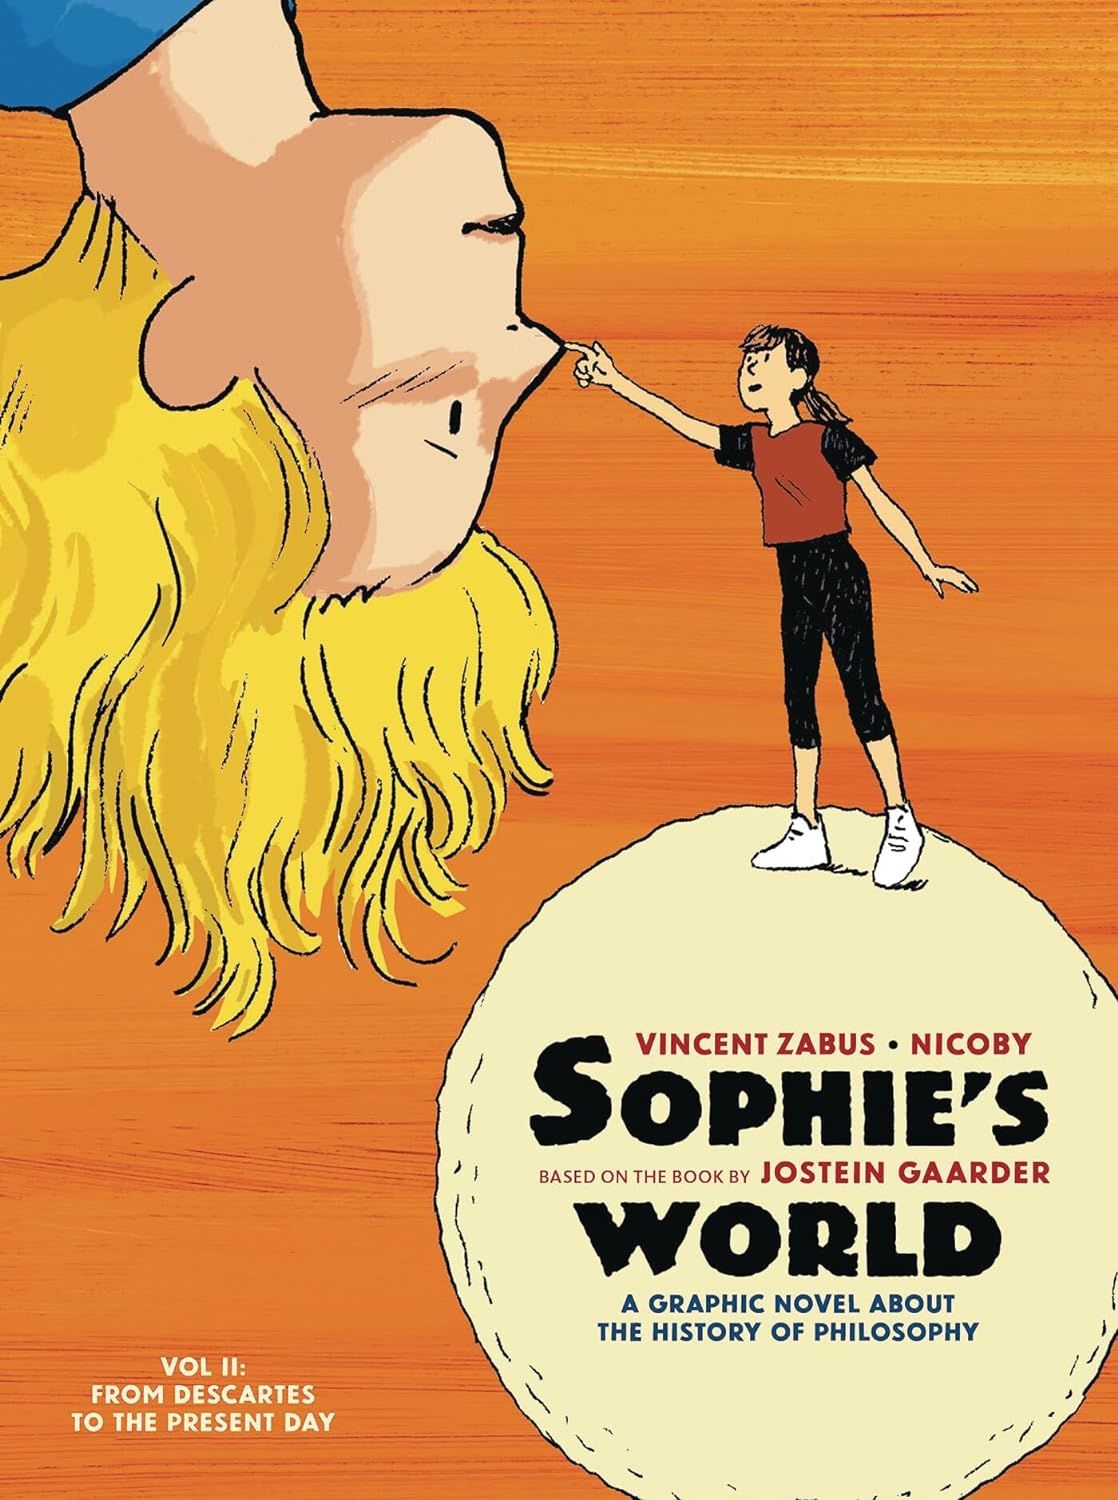 Sophie's World: A Graphic Novel about the History of Philosophy. Vol II: From Descartes to the Present Day